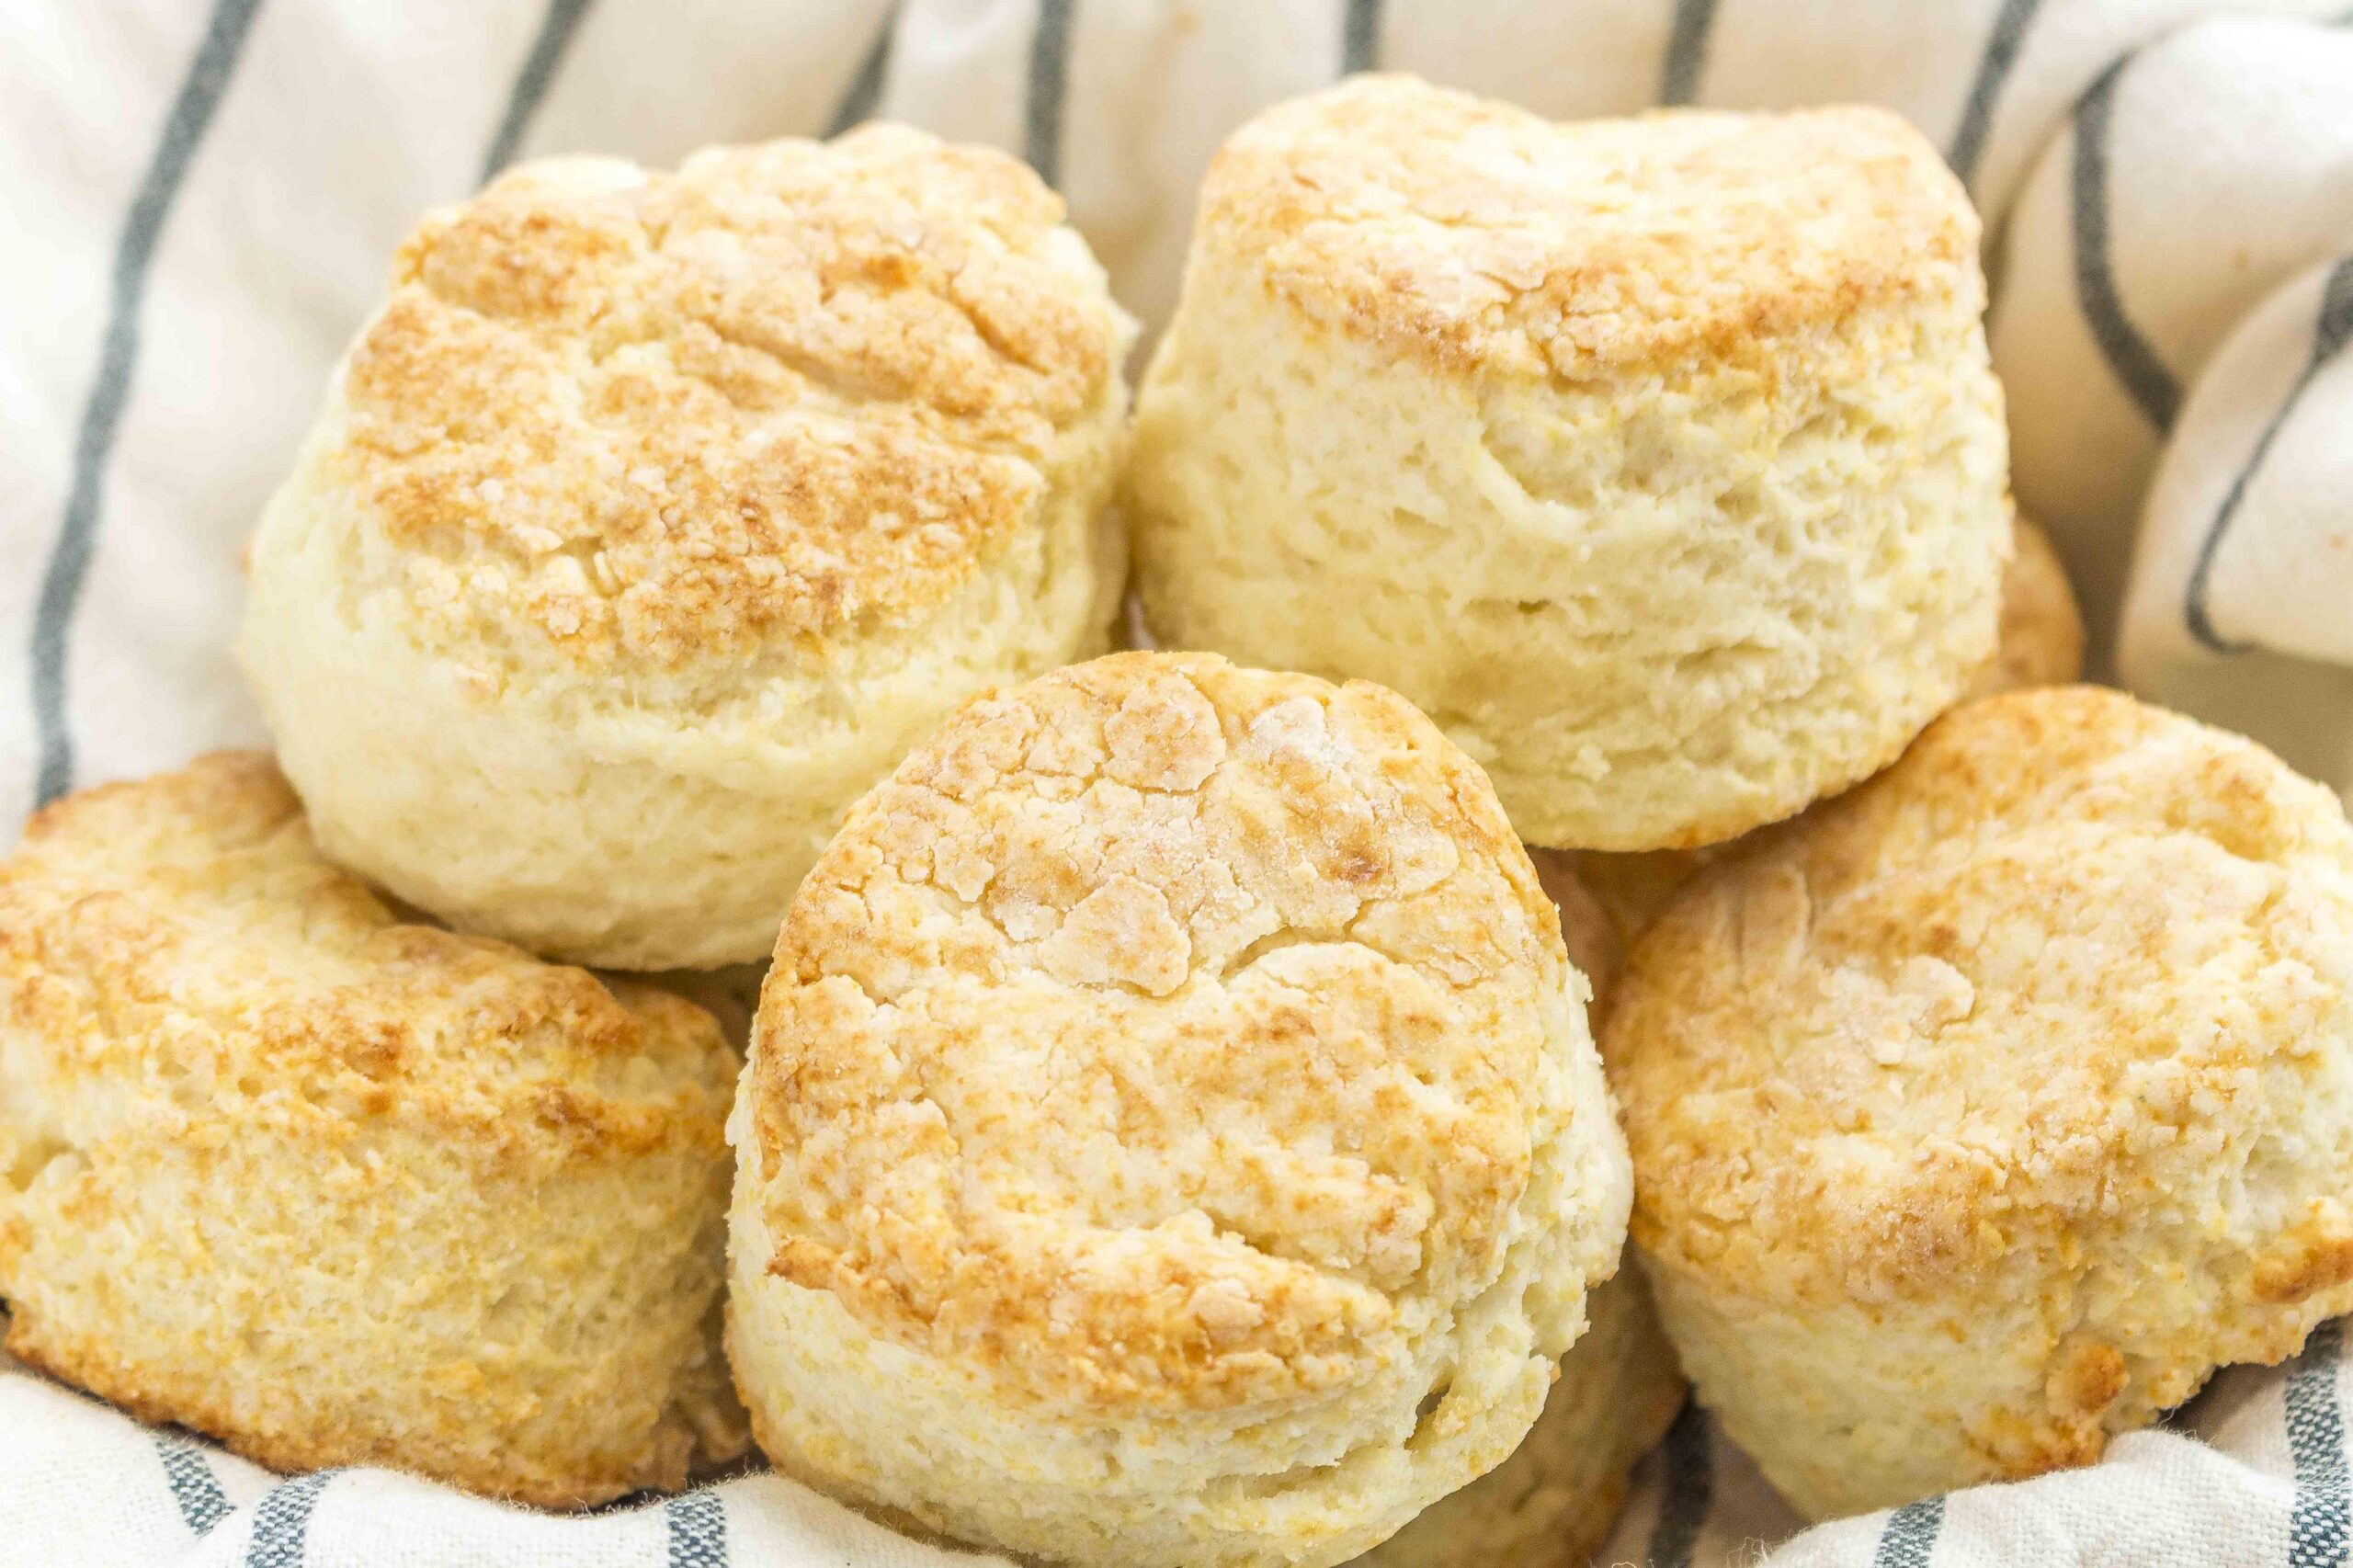  Breakfast, lunch, or dinner - these biscuits have got you covered.